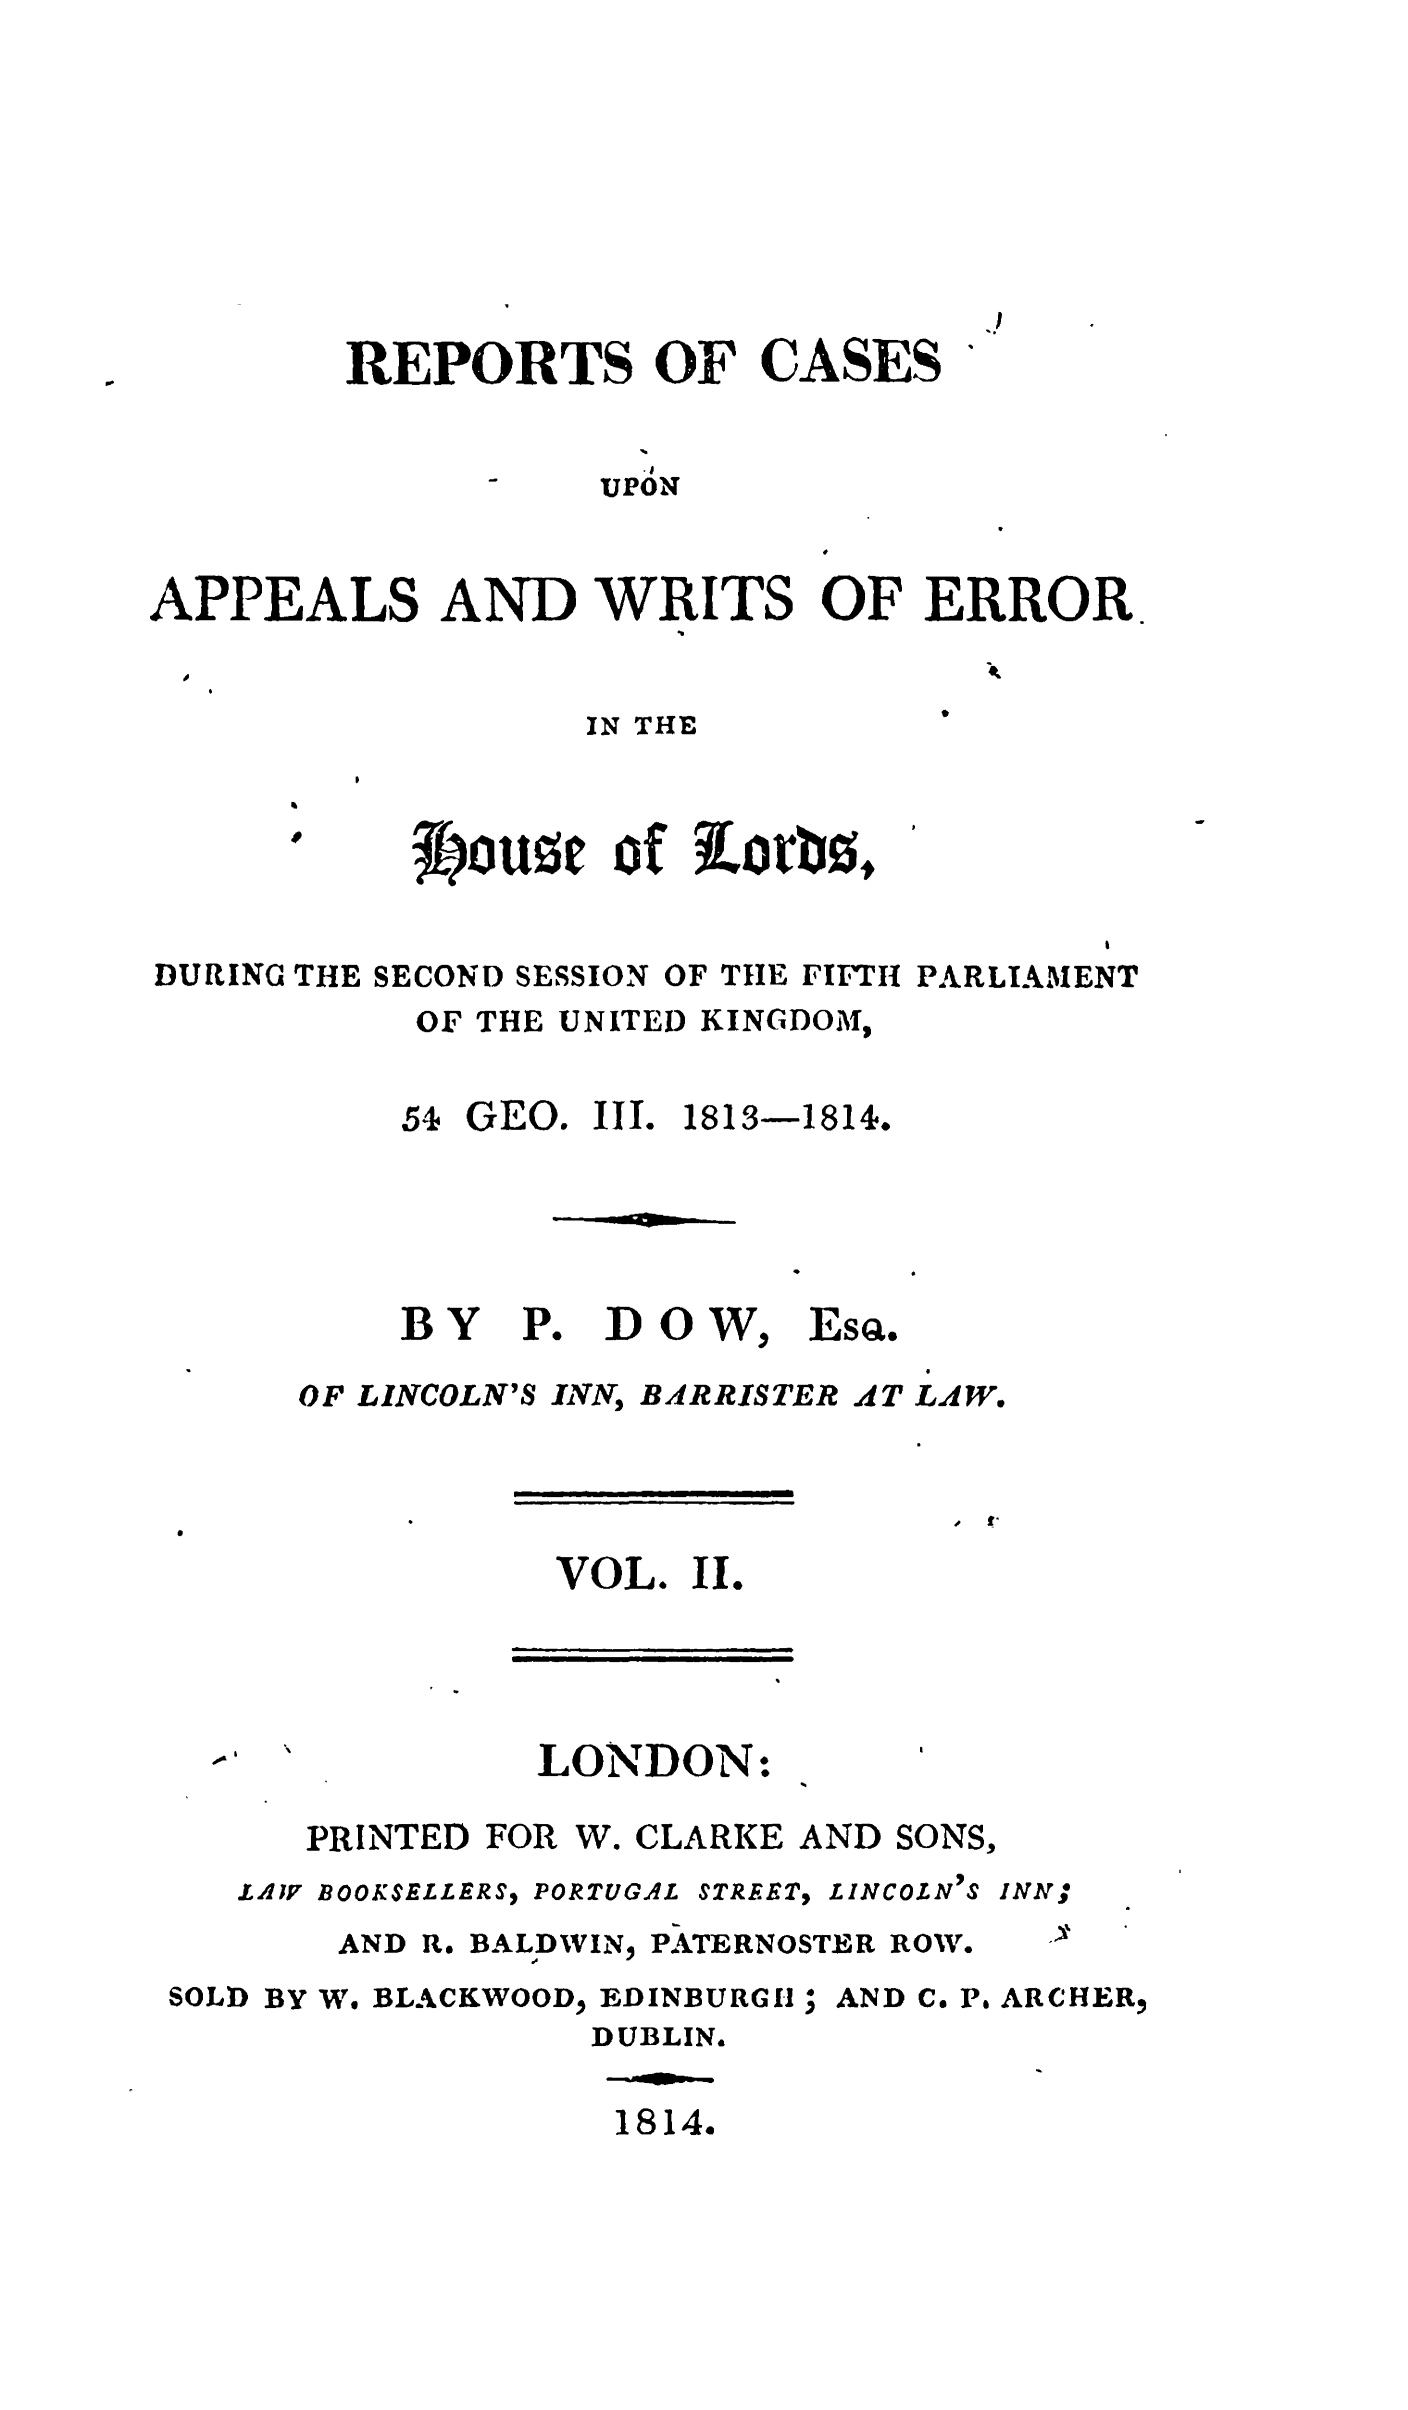 handle is hein.stair/recapwerhol0002 and id is 1 raw text is: 








REPORTS OF CASES


                    .I
                    UPON


APPEALS AND WRITS OF ERROR


IN THE


3E oure of iorb0,


                                       I
DURING THE SECOND SESSION OF THE FIFTH PARLIAMENT
           OF THE UNITED KINGDOM,


5s GEO. III.


1813-1814.


BY


PO


DOW,


ESQ.


OF LINCOLN'S INN, BARRISTER AT LAW.


                I  1 l


VOL. II.


LONDON:


      PRINTED FOR W. CLARKE AND SONS,
   LAZV BOOKSELLERS, PORTUGAL STREET, LINCOLN'S INN,
       AND R. BALDWIN, PATERNOSTER ROW.
SOLD BY We BLACKWOOD, EDINBURGH; AND C. P. ARCHER,
                 DUBLIN.

                 1814.


.9


